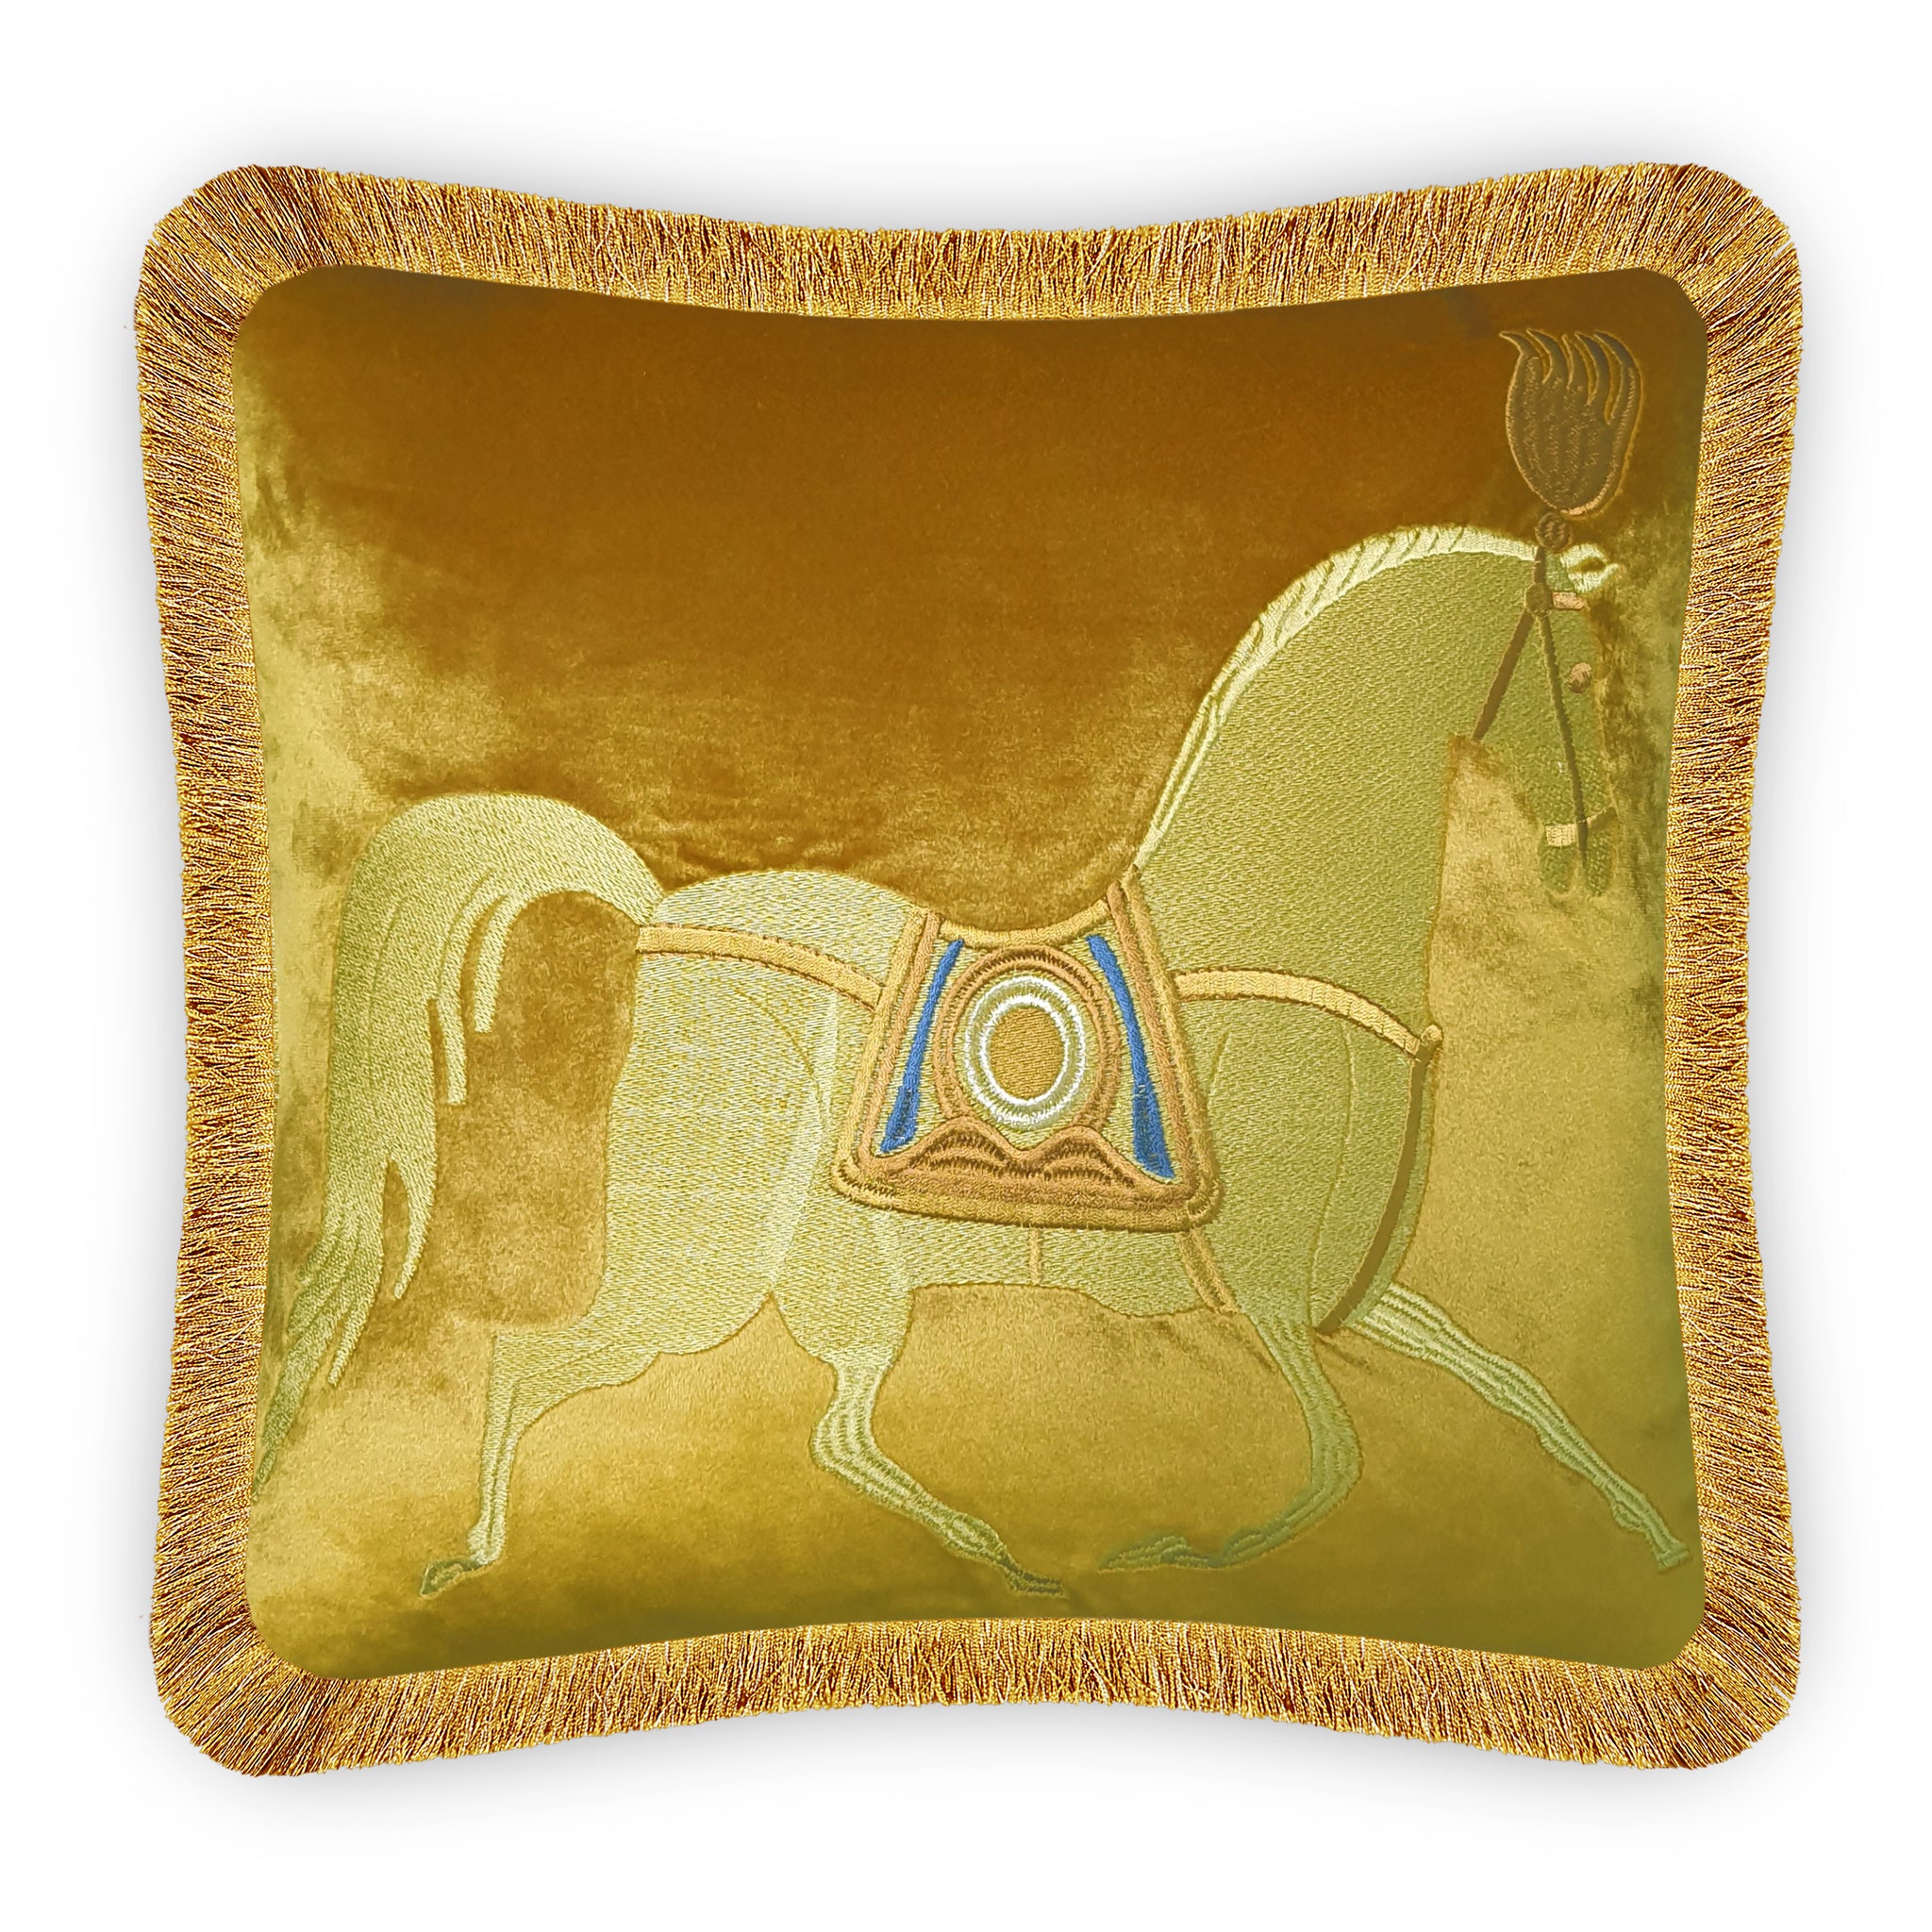 Velvet Horse Embroidered Cushion Cover, Baroque Style Decorative Pillowcase, Classic Home Decor Throw Pillow with Fringe for Bedroom, Living Room, 18x18 Inch, 45x45 cm